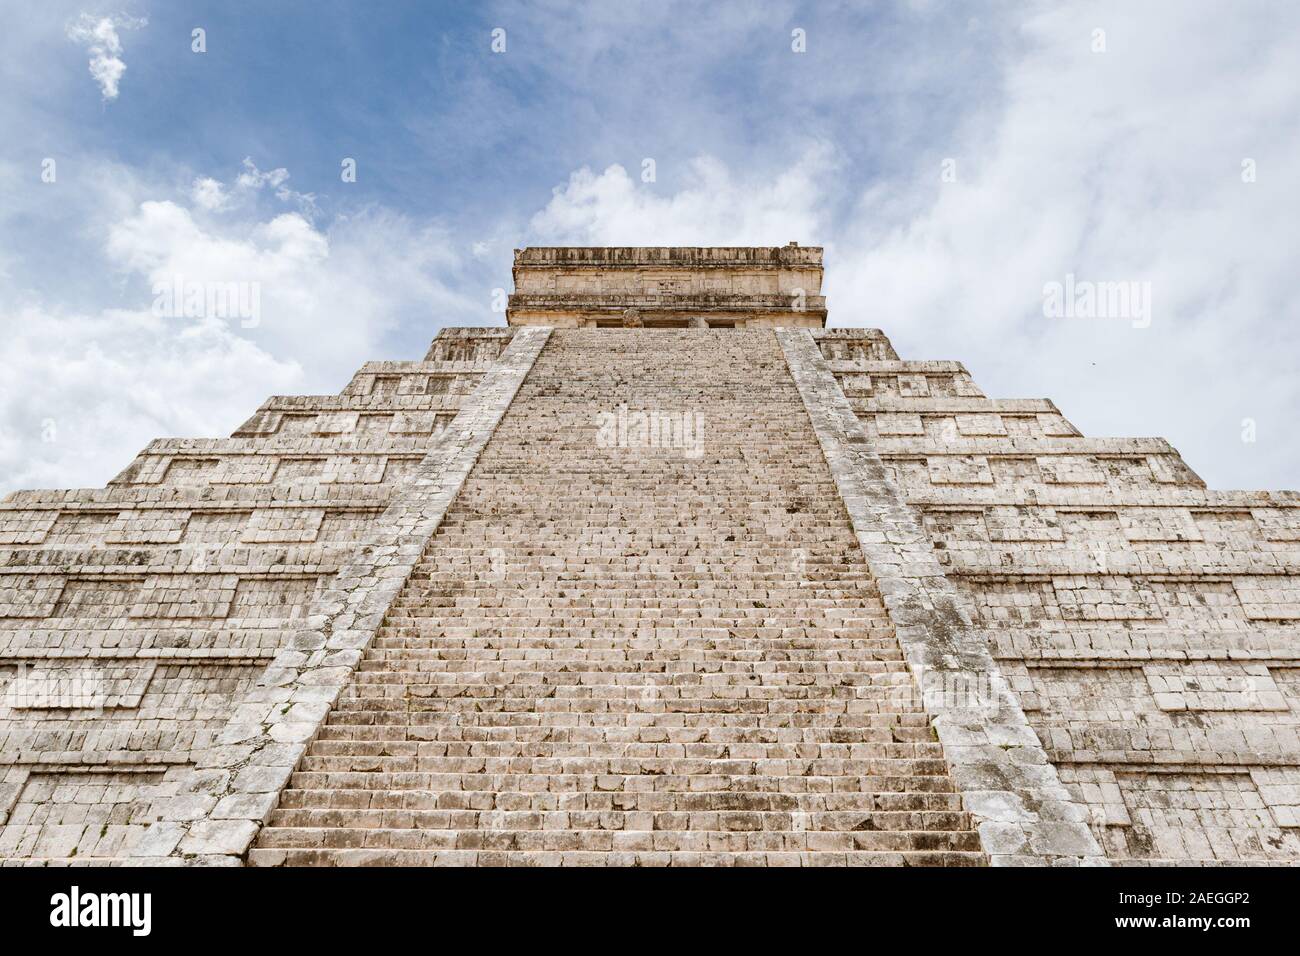 Chichen Itza, Yucatan, Mexico: Close-up on the emblematic Temple of Kukulcan ('El Castillo ') Mayan Pyramid at Chichen Itza archaeological site. Stock Photo